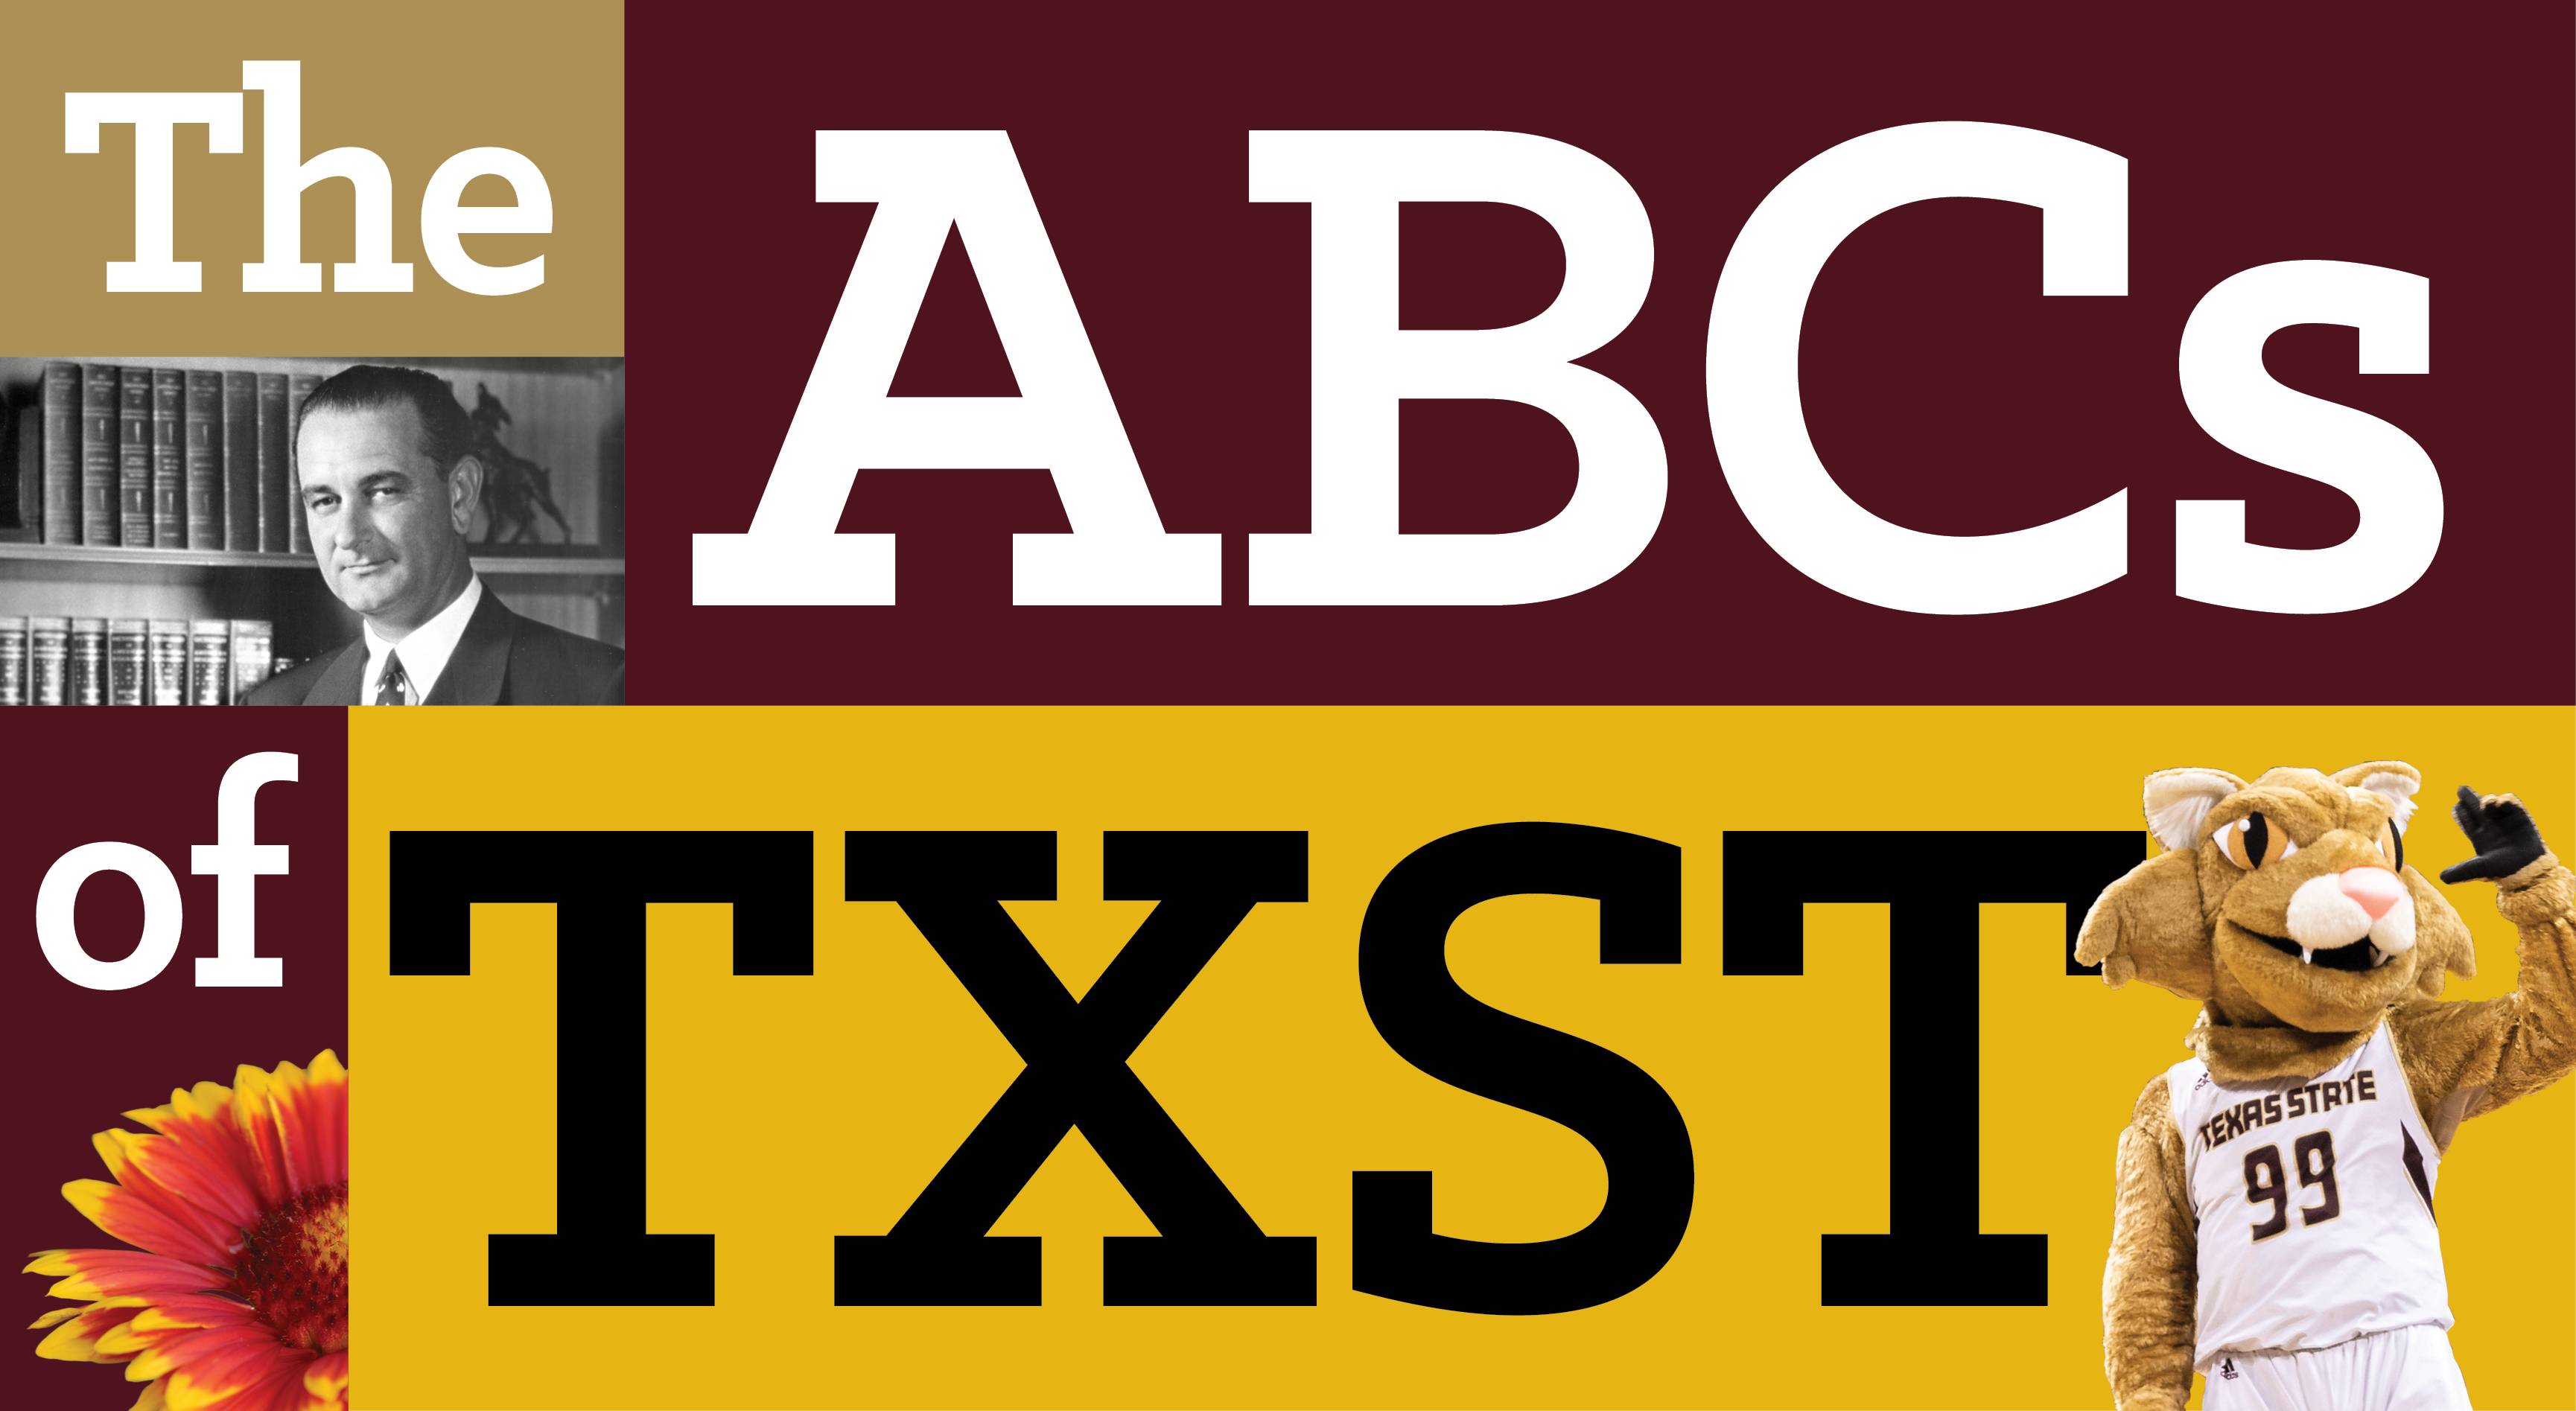 graphic reading "the ABCs of TXST"